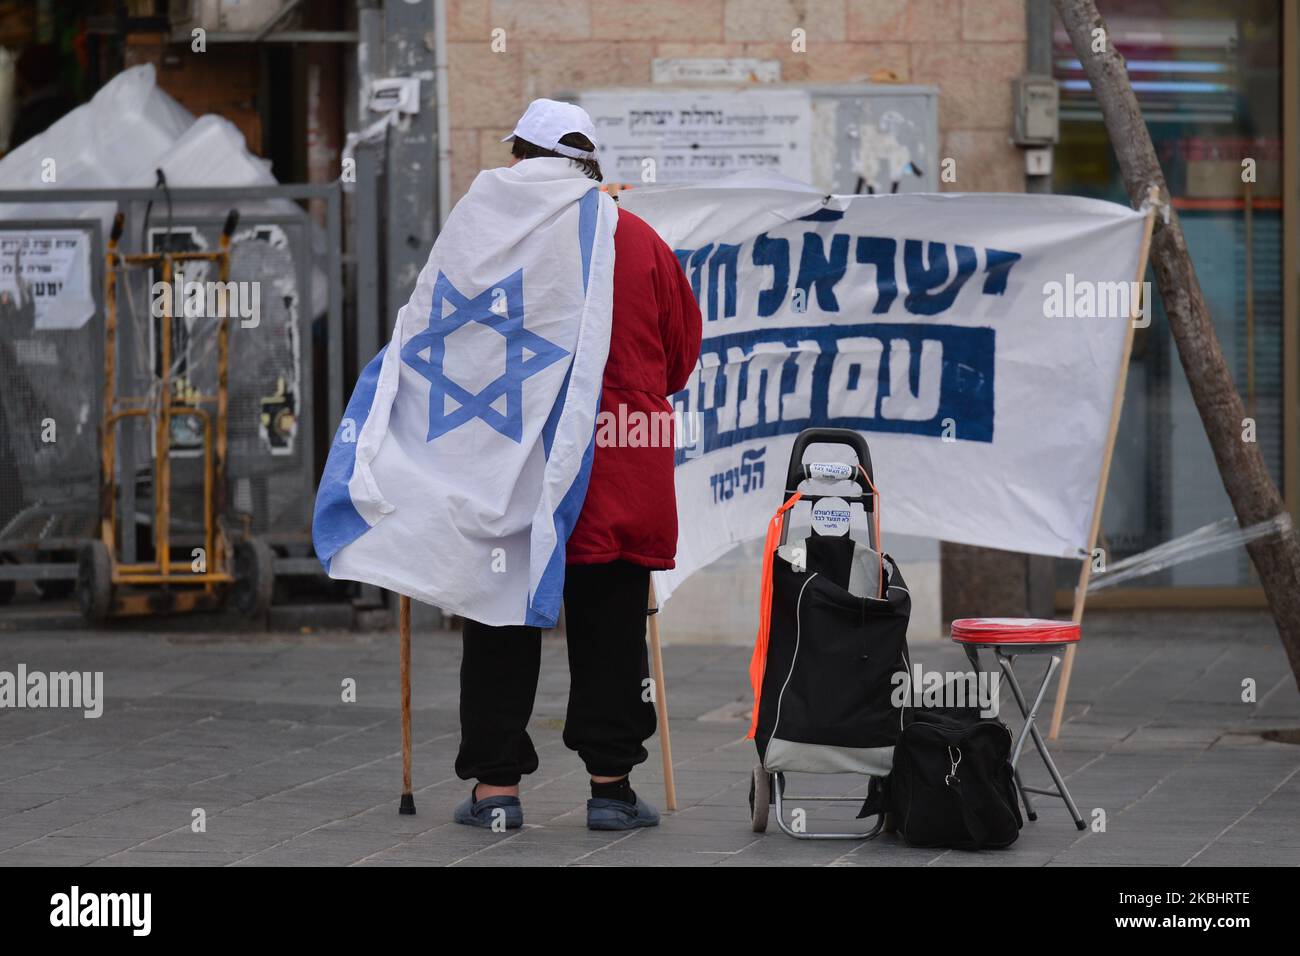 Likud political party campaigner seen near the entrance to Mahane Yehuda market. Israelis head to the polls for the third election in less than a year on March 2nd. On Monday, February 24, 2020, in Jerusalem, Israel. (Photo by Artur Widak/NurPhoto) Stock Photo